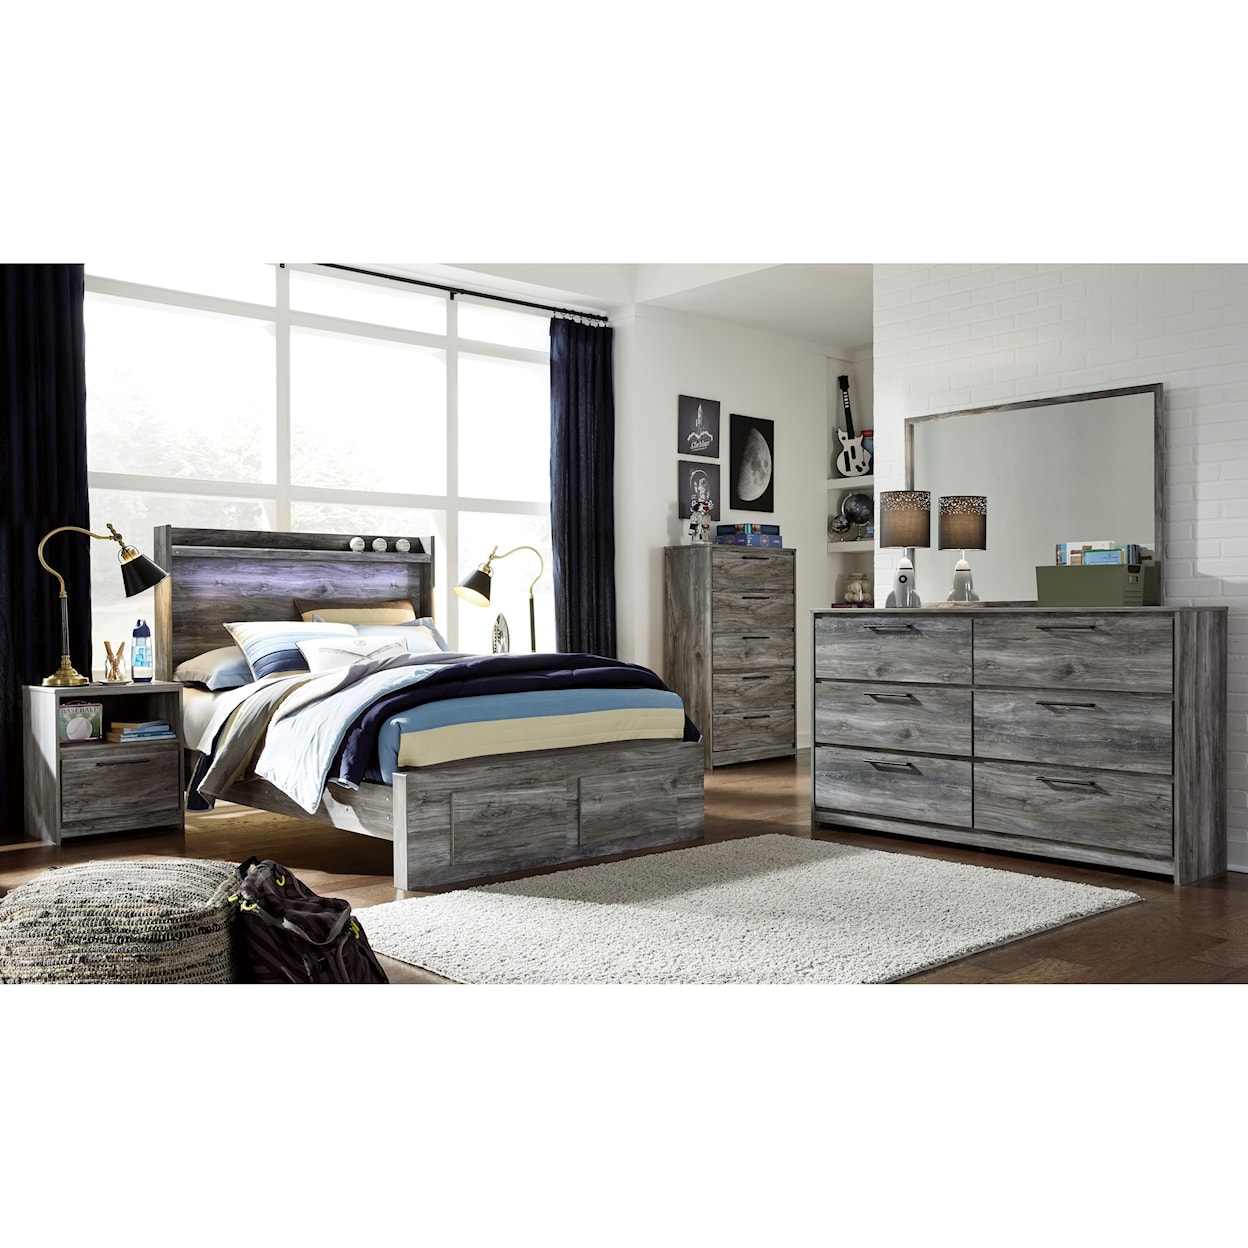 Signature Design by Ashley Baystorm Full Panel Bed with Storage Footboard